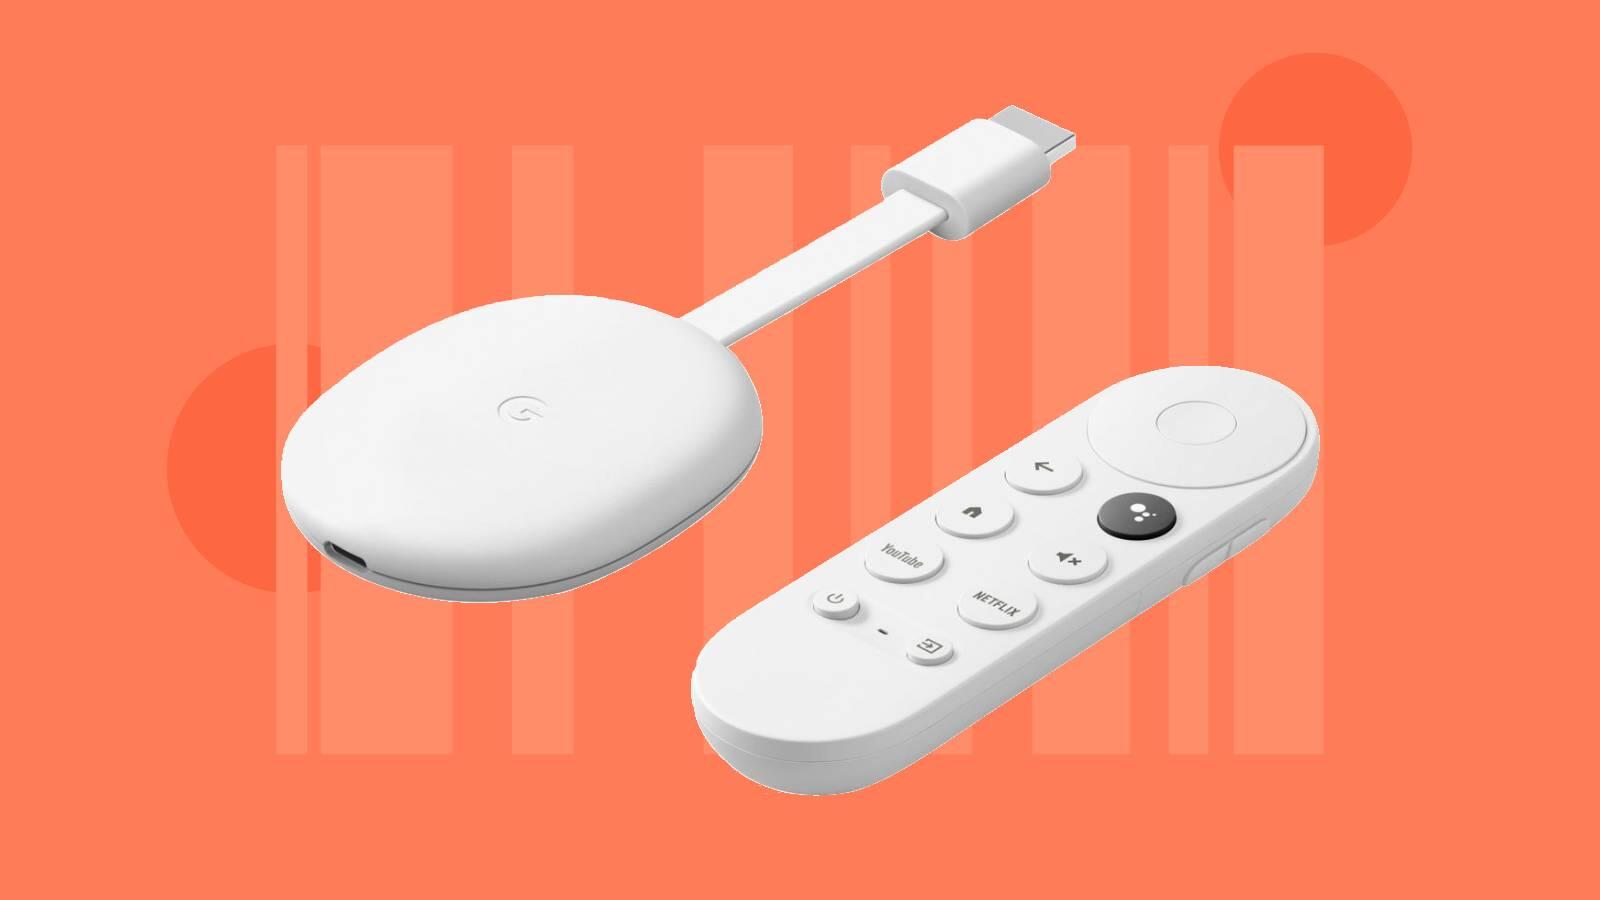 Want Chromecast with Google TV free? Here's how to get it